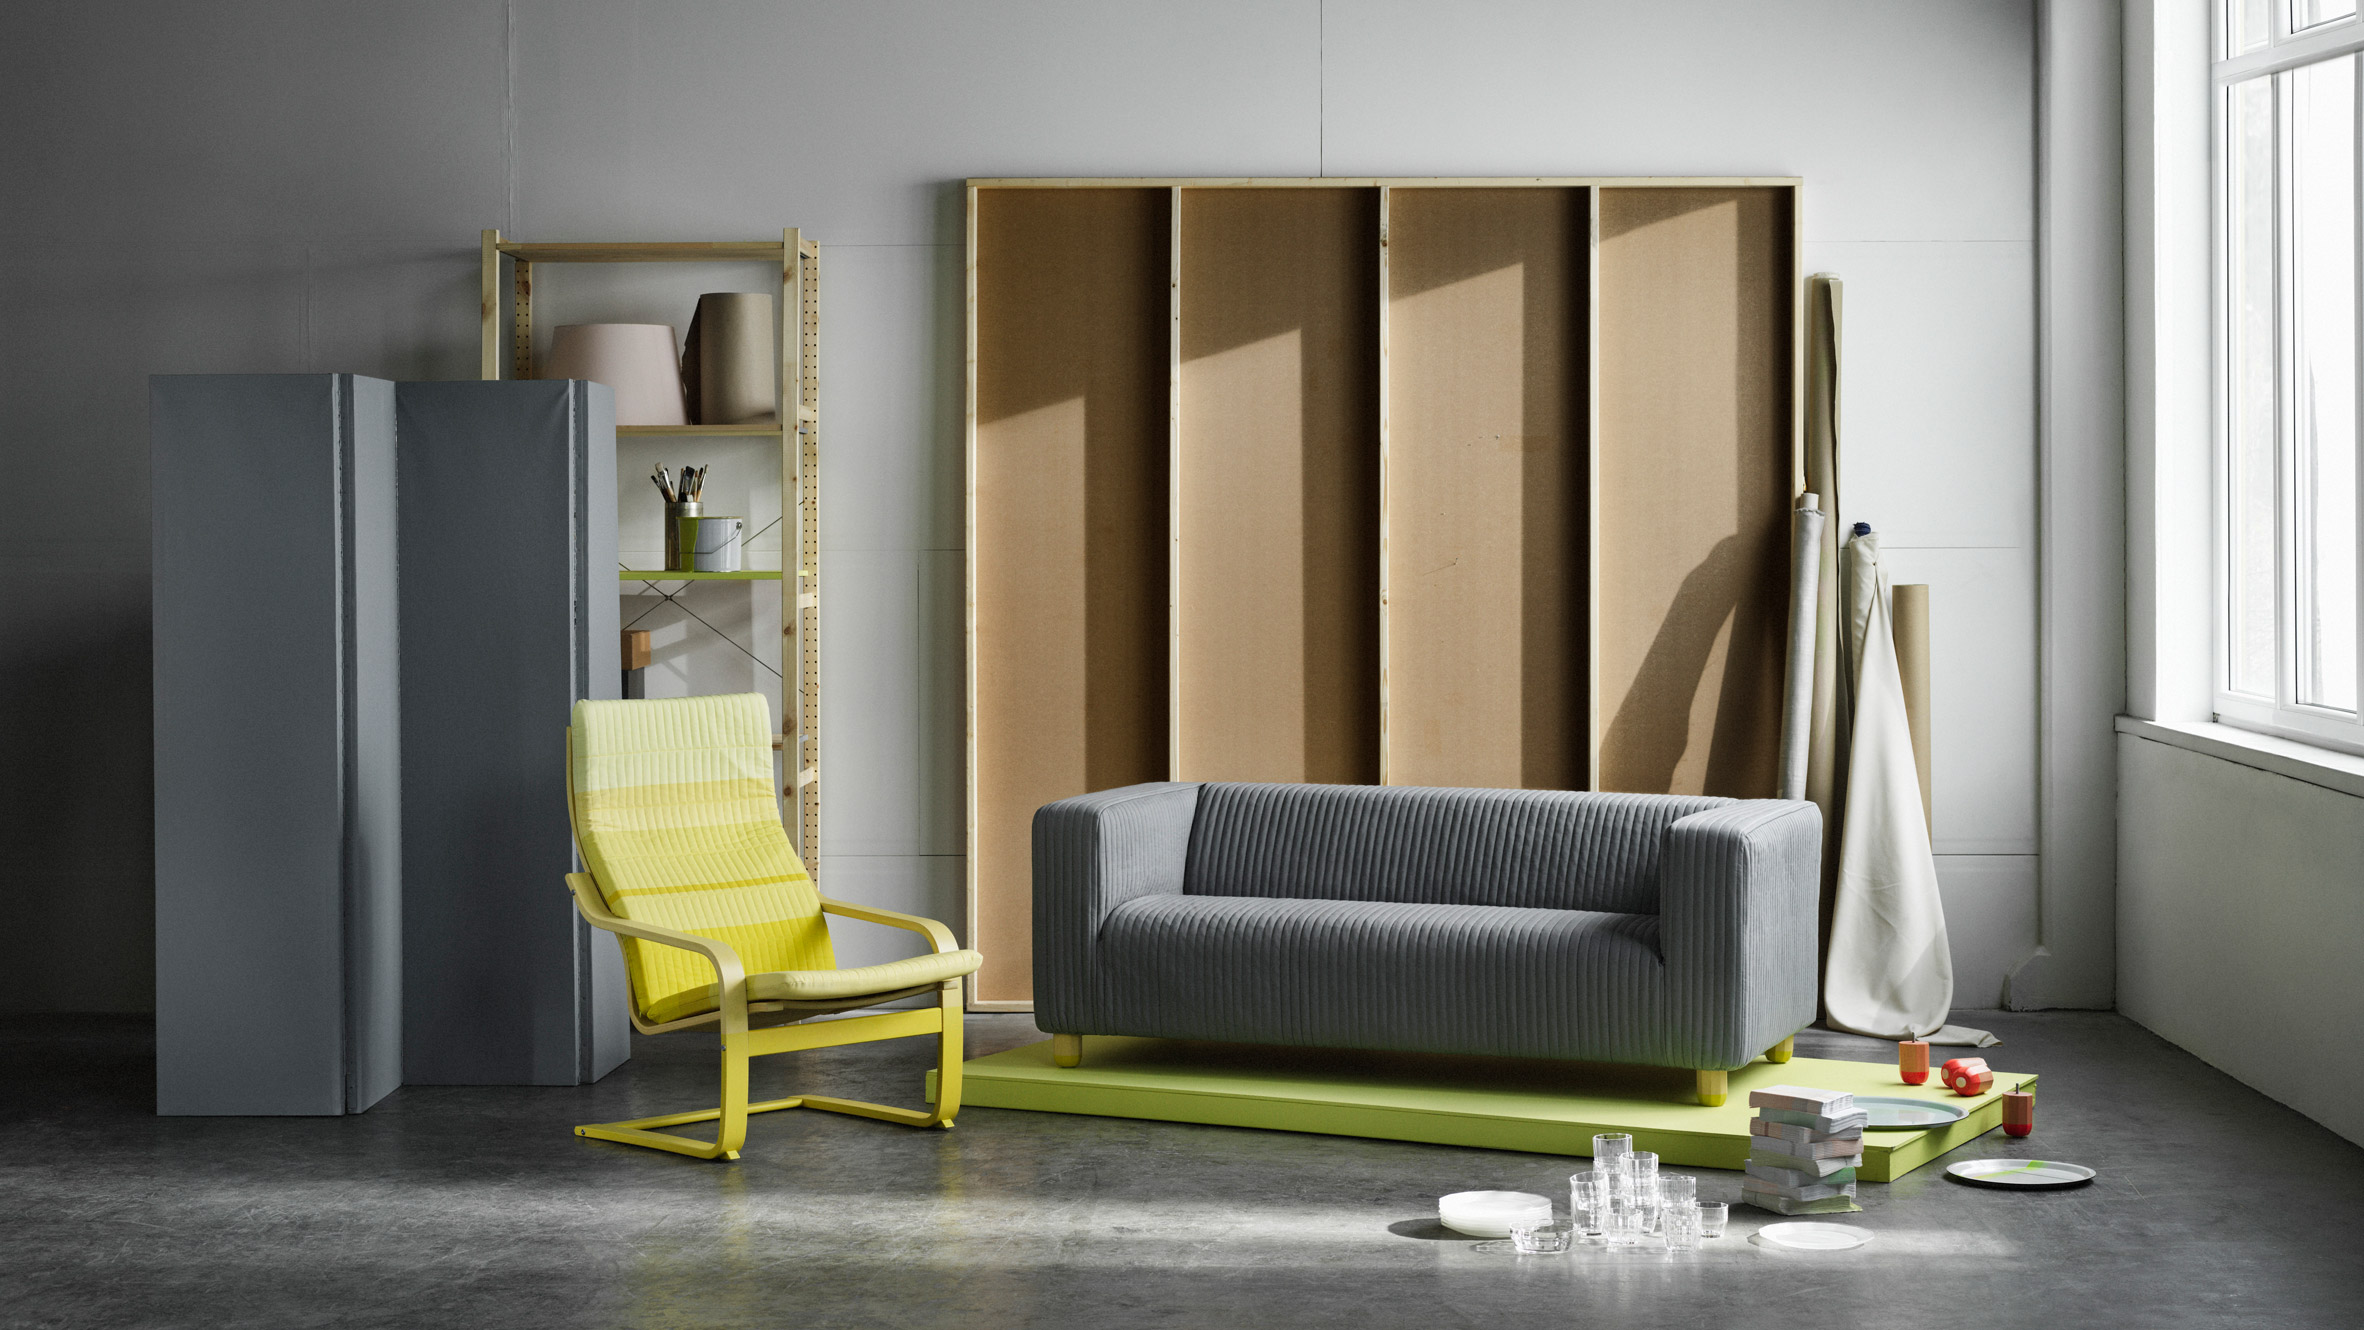 Ikea Asks Scholten And Baijings To Hack Two Of Its Most Popular Furniture